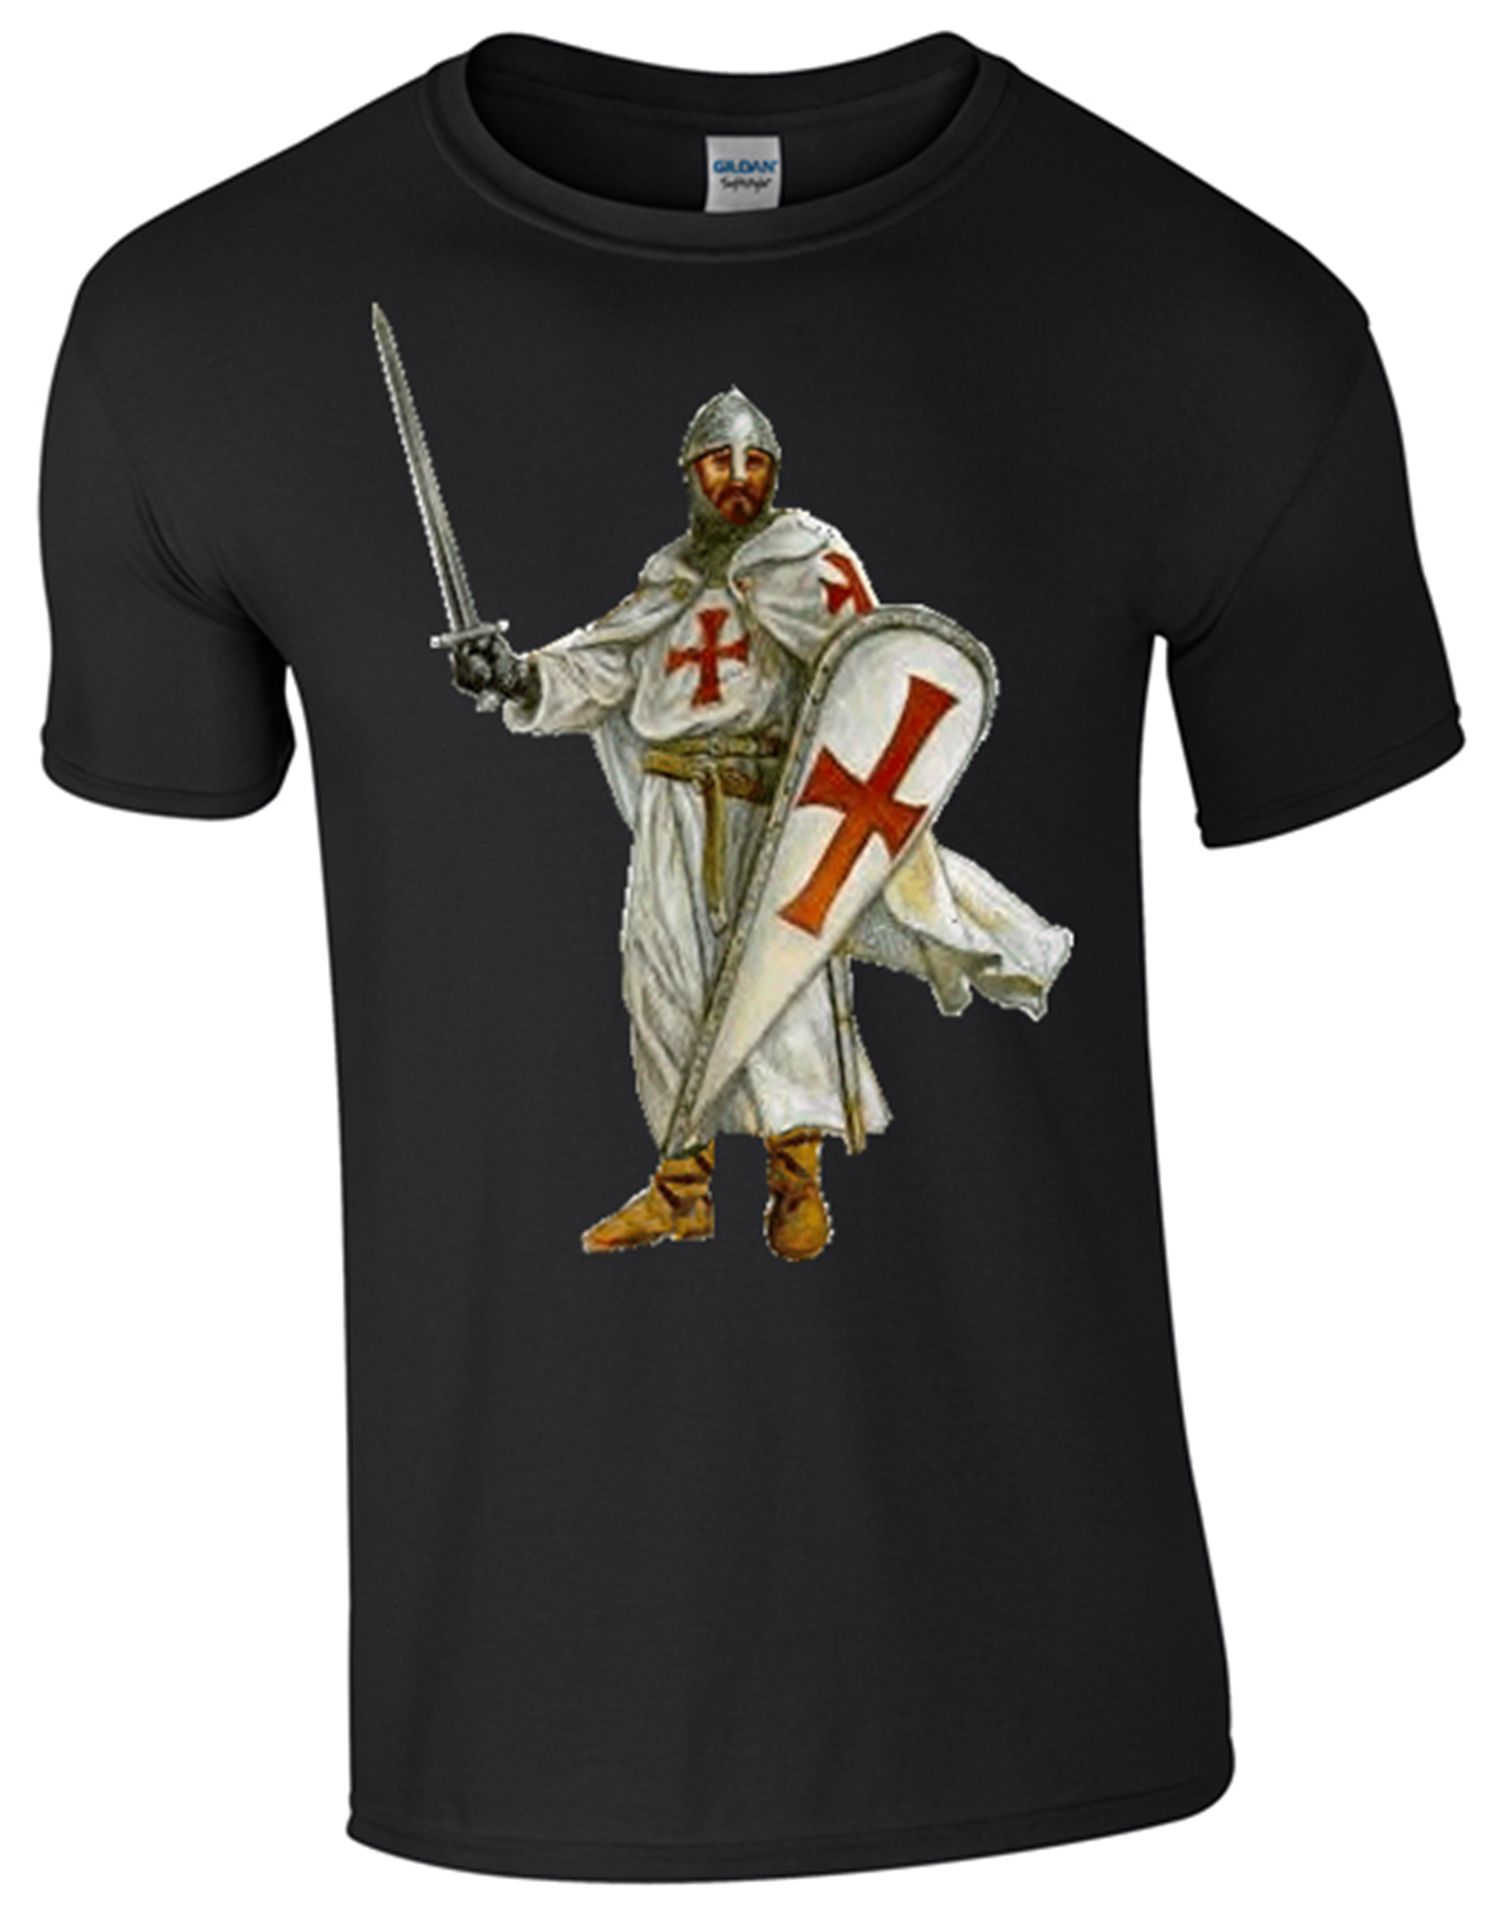 St George's Crusader, black & white T-Shirt Printed DTG (Direct to Garment) for a Permanent Finish. - Army 1157 kit S / Black Army 1157 Kit Veterans Owned Business